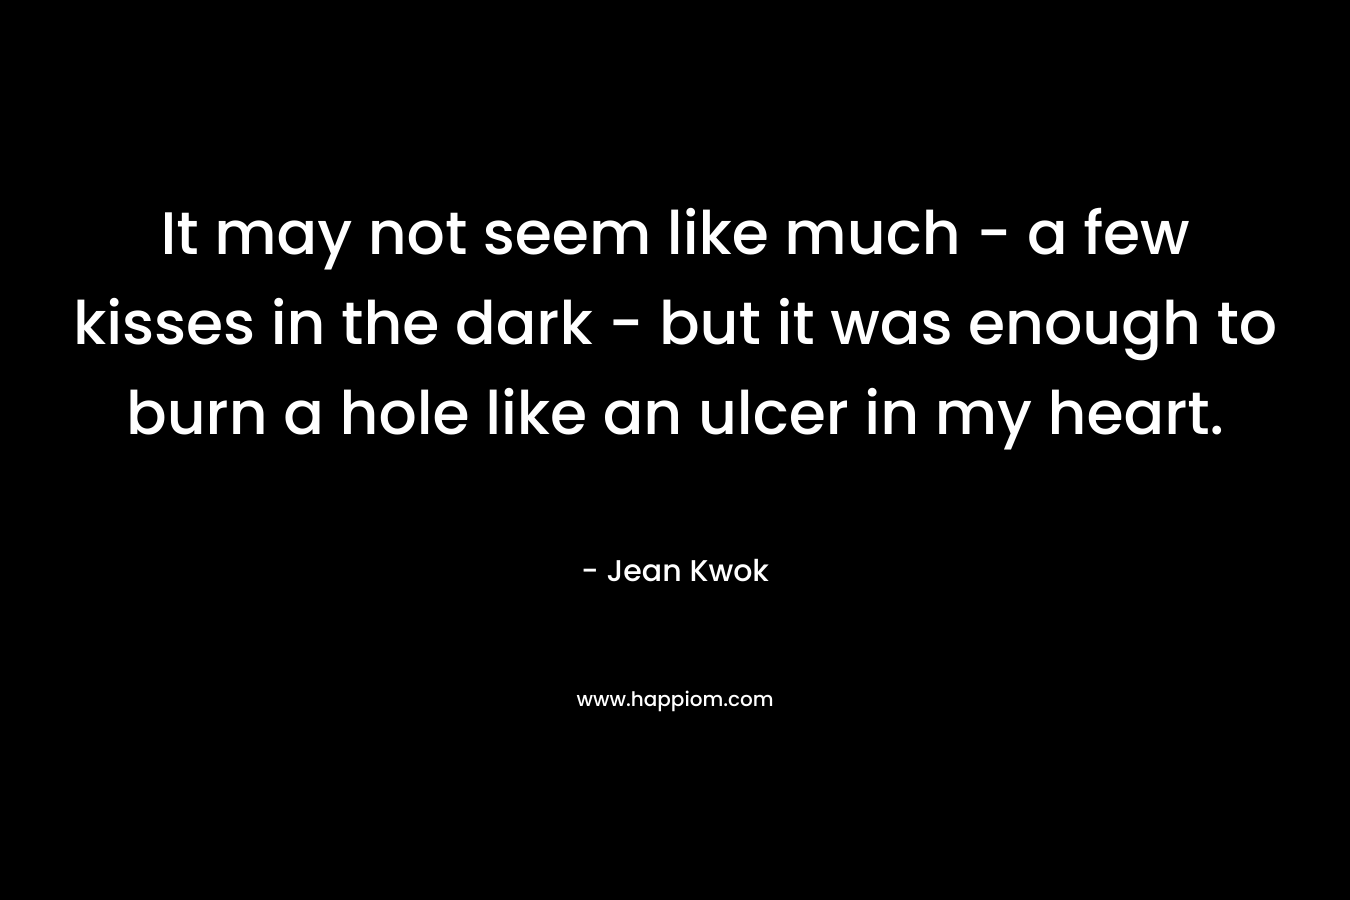 It may not seem like much - a few kisses in the dark - but it was enough to burn a hole like an ulcer in my heart.